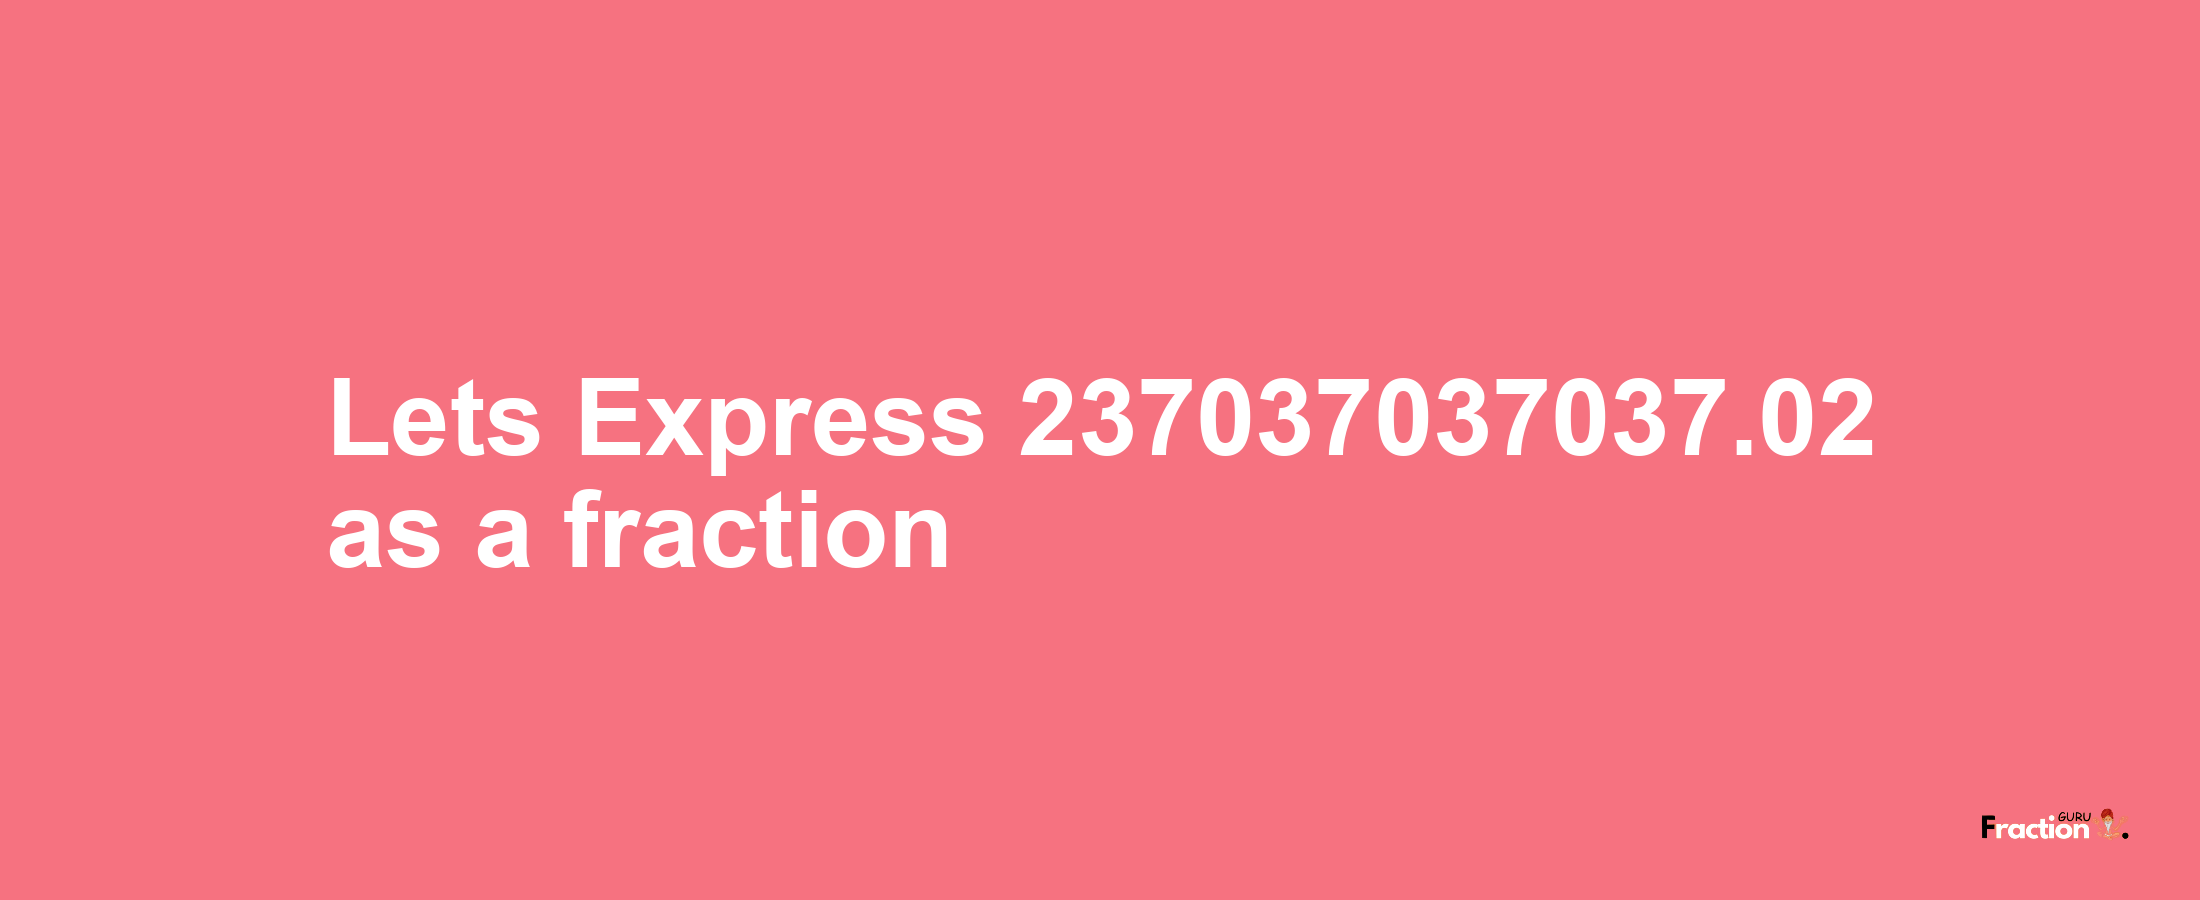 Lets Express 237037037037.02 as afraction